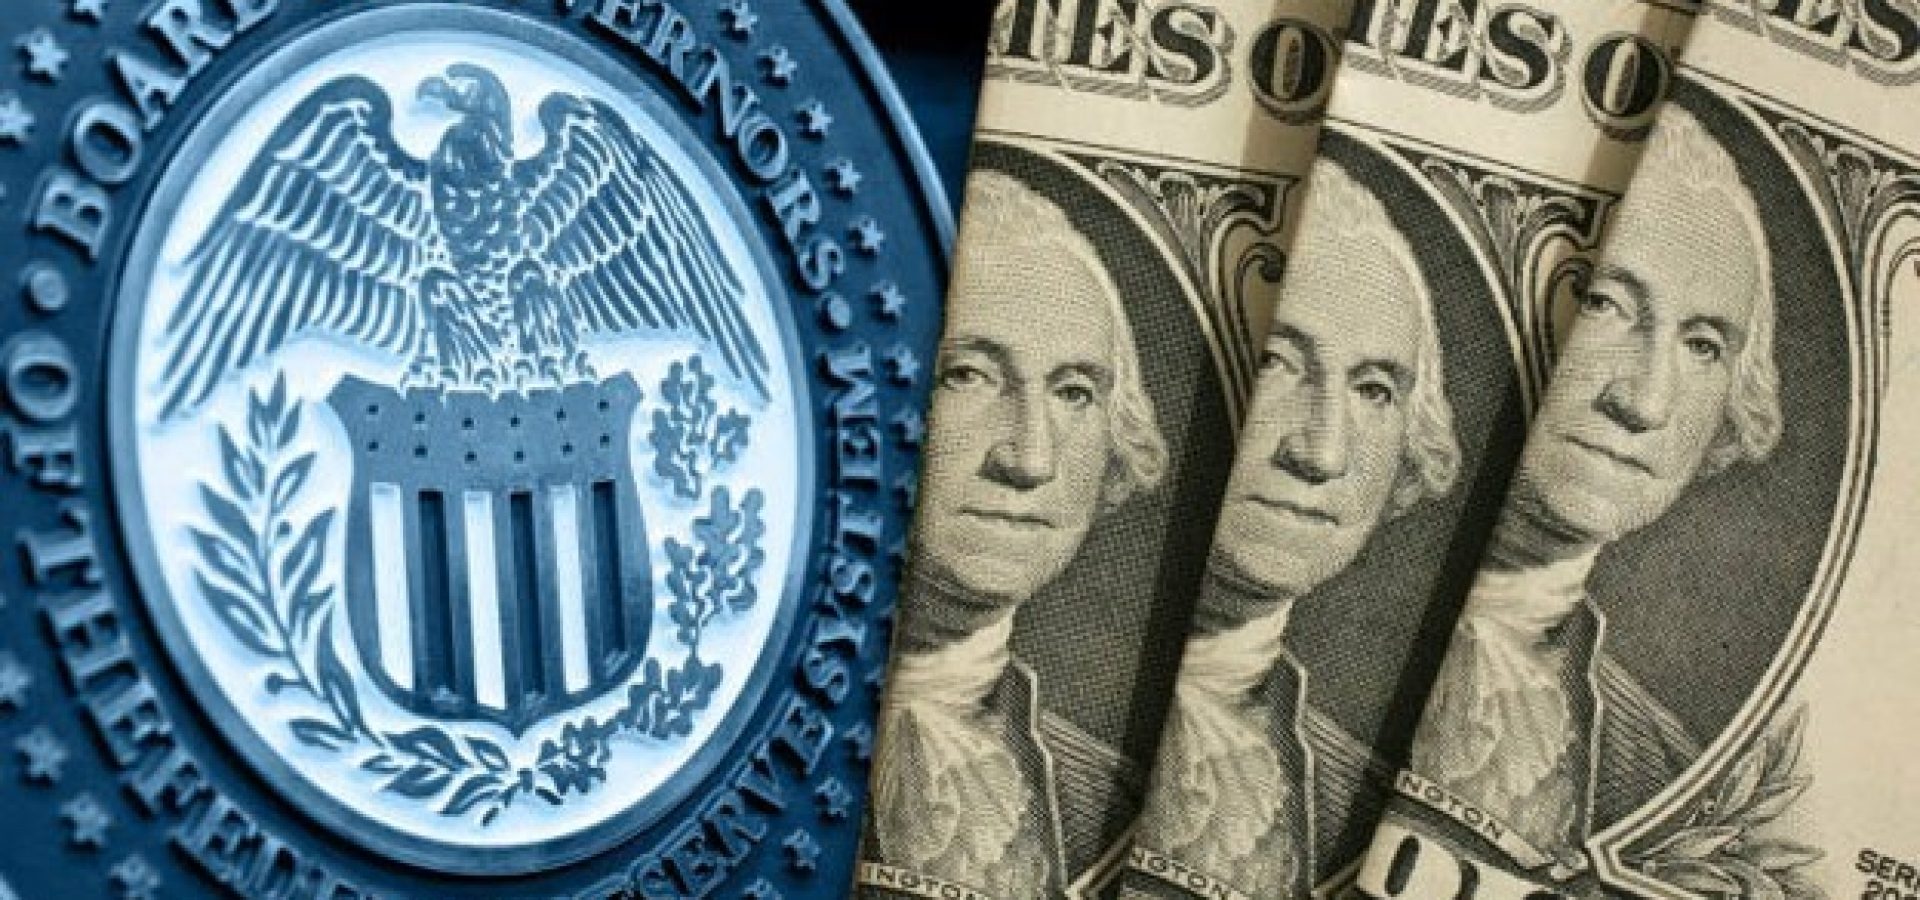 Federal Reserve and a Digital Version of the U.S. Dollar